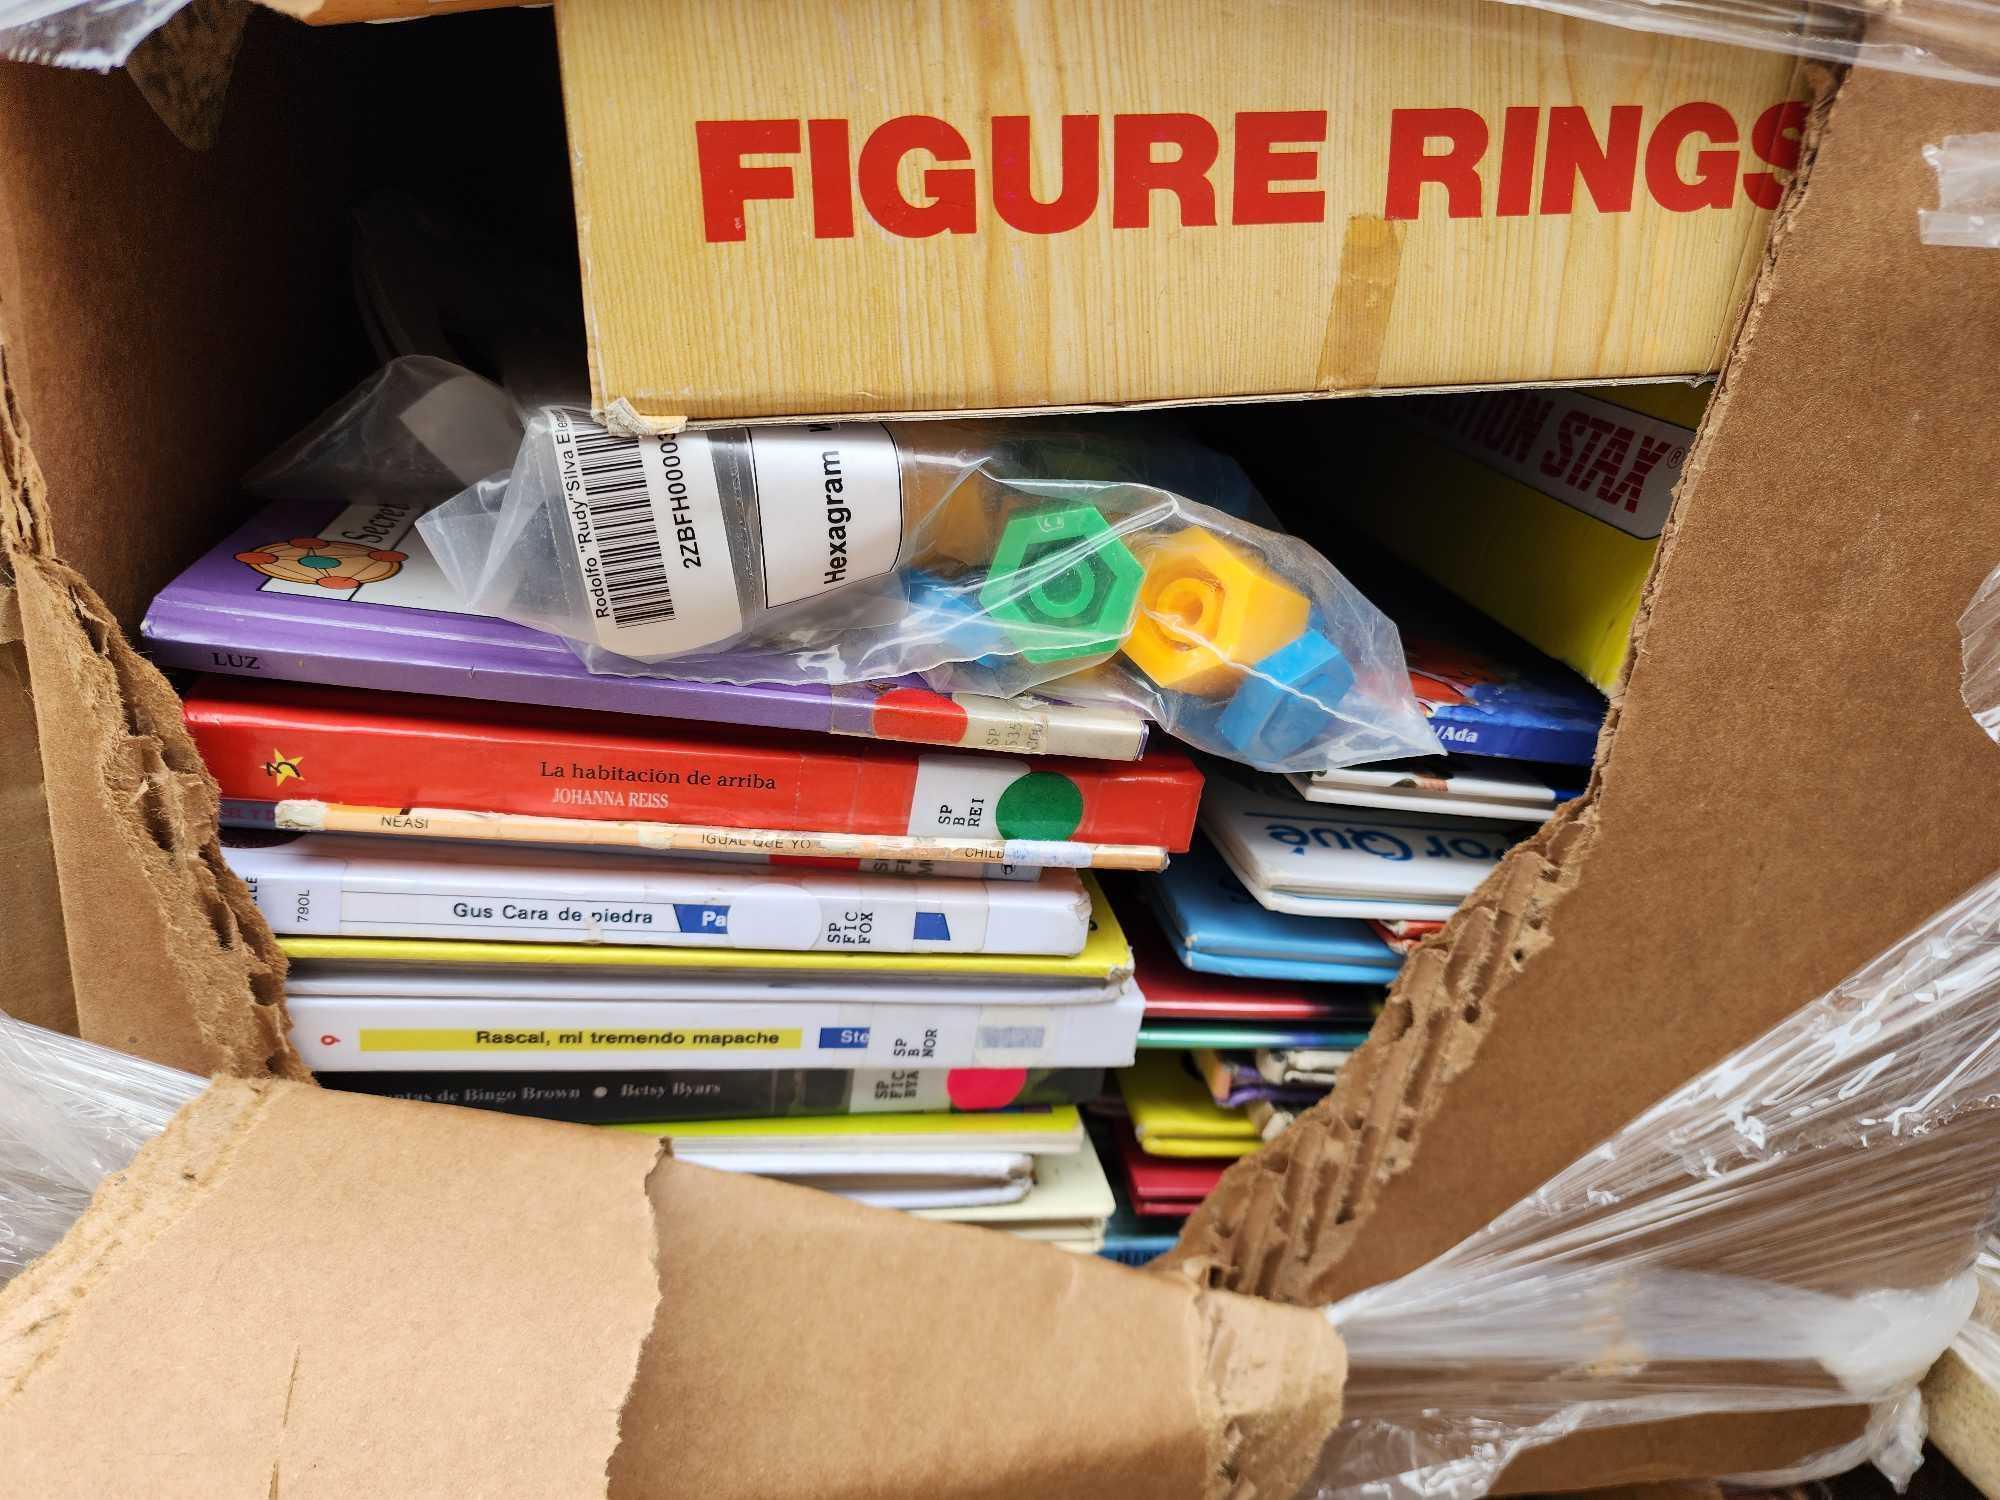 (4) Boxes of Leveled Literacy Intervention for Grade 3, Student Books, Children Toys